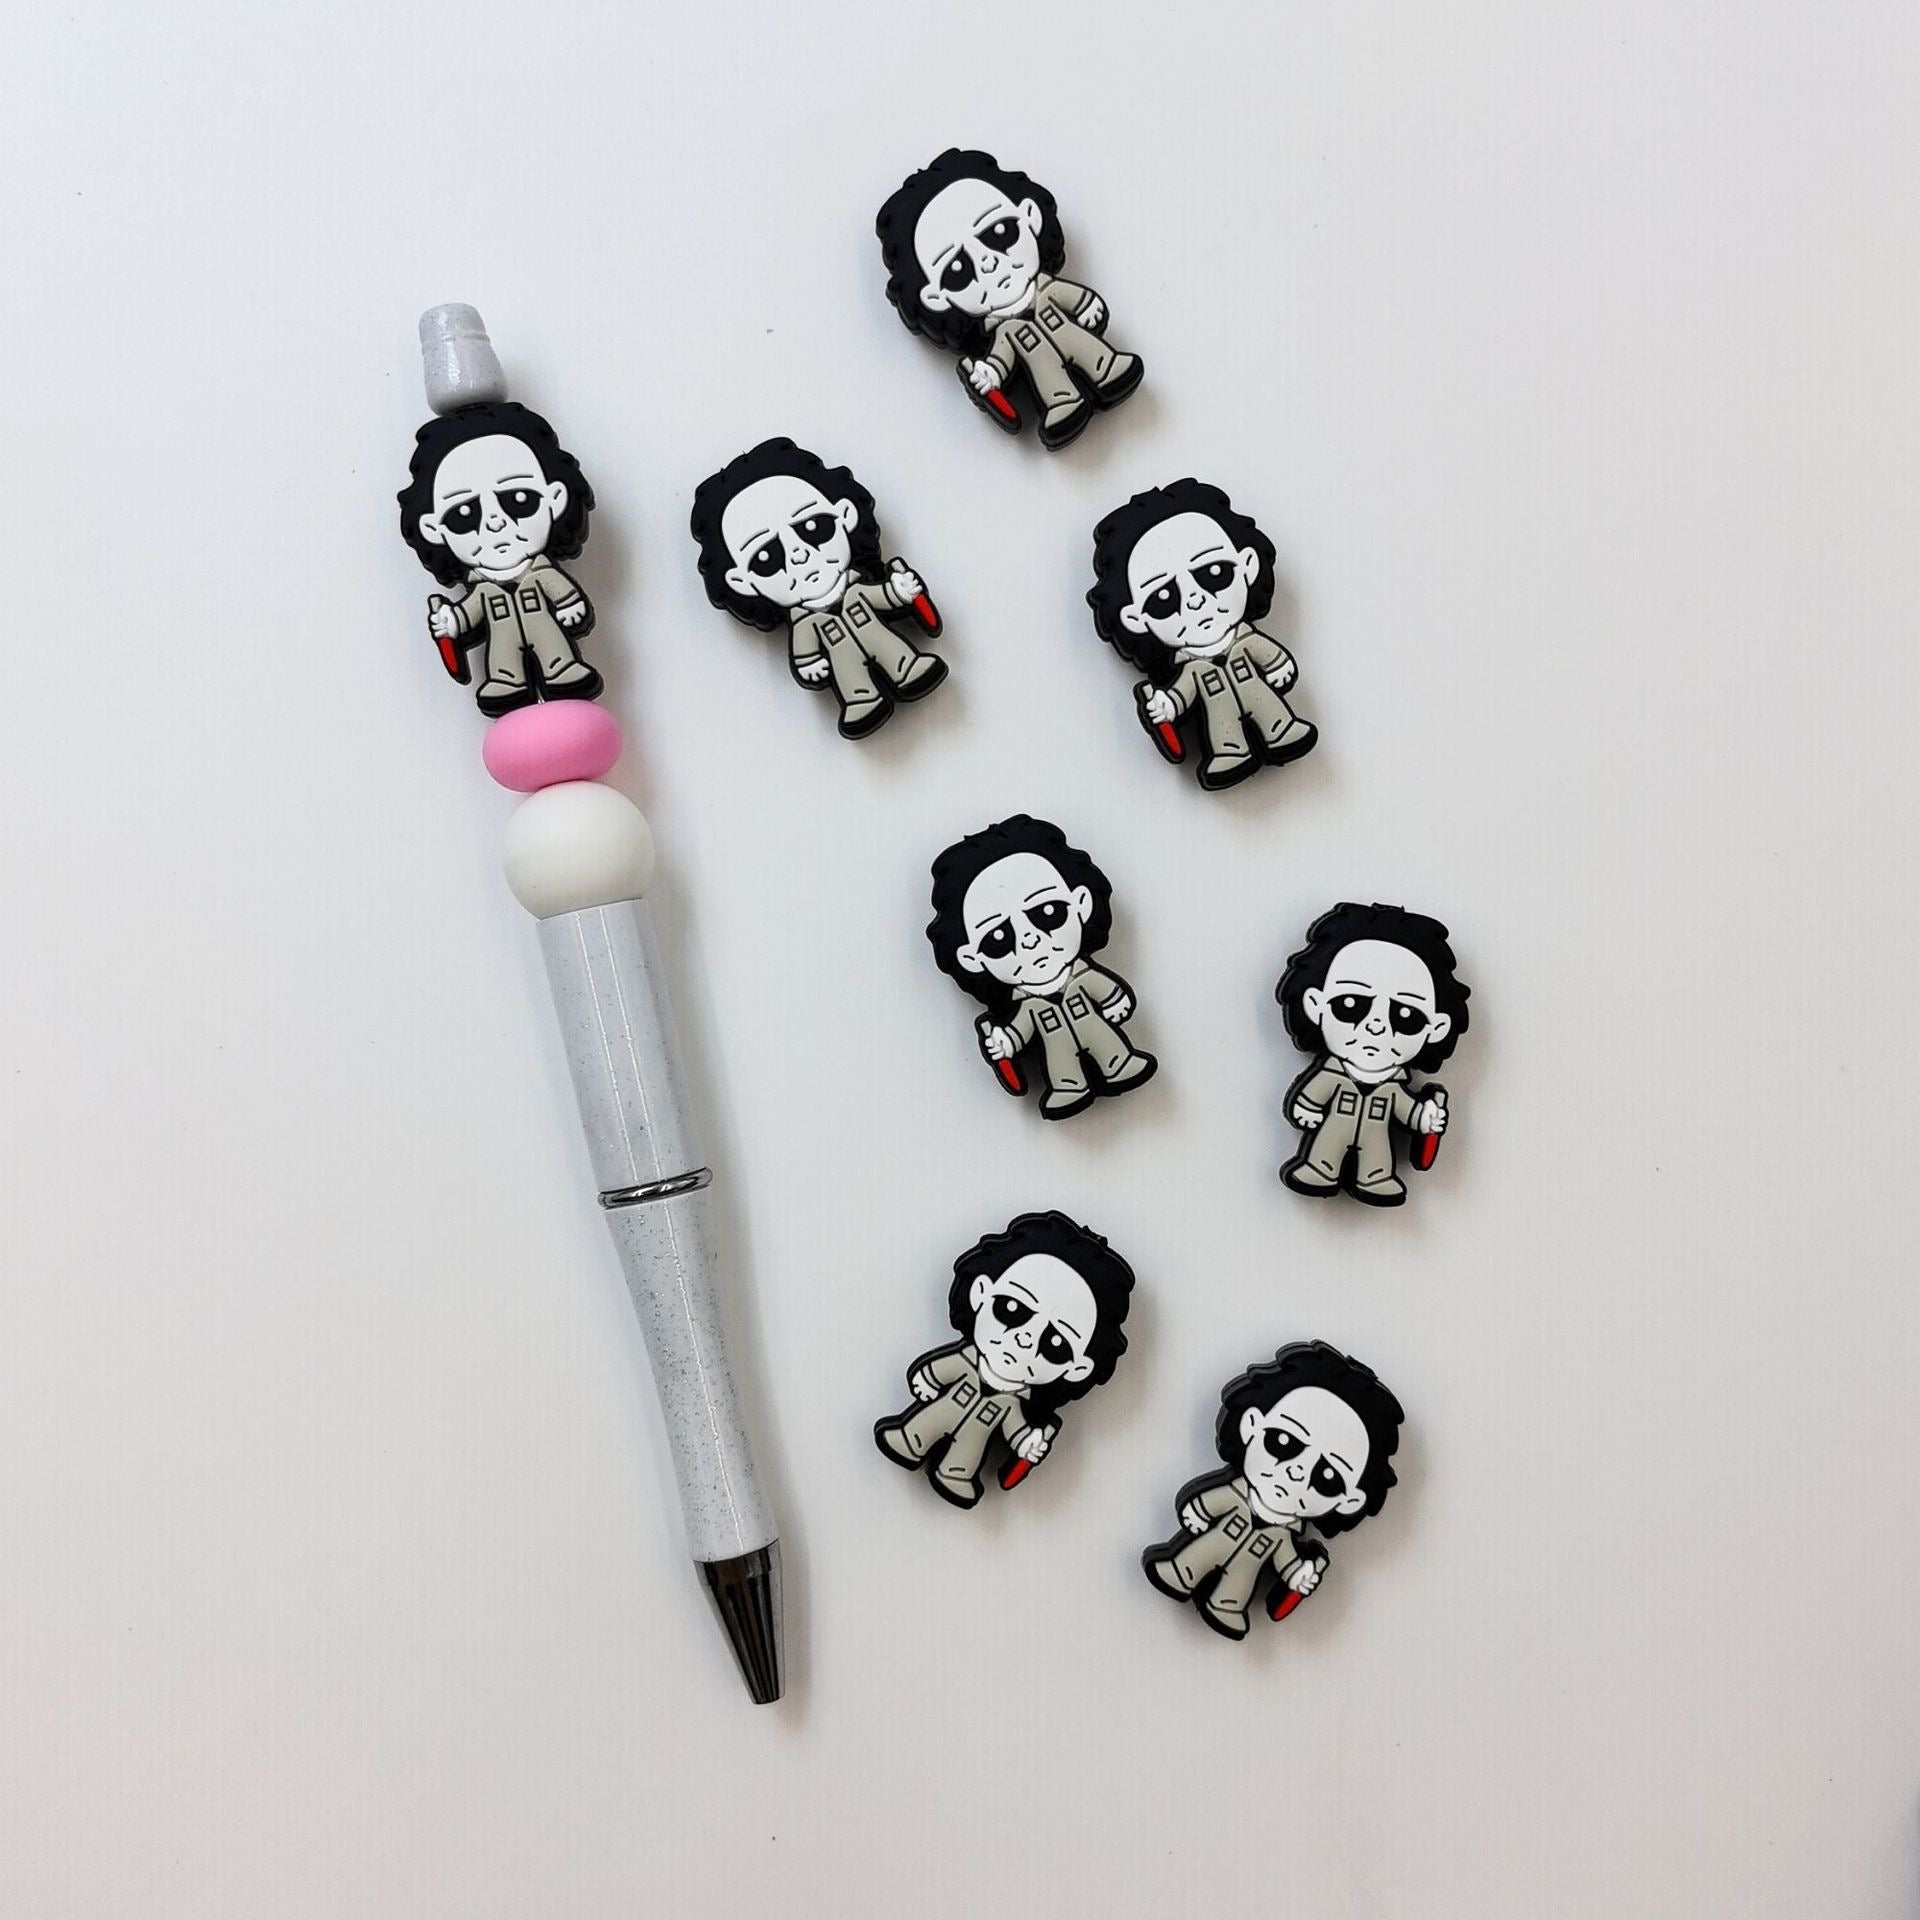 10 Pieces Michael Jackson Silicone Focal Beads